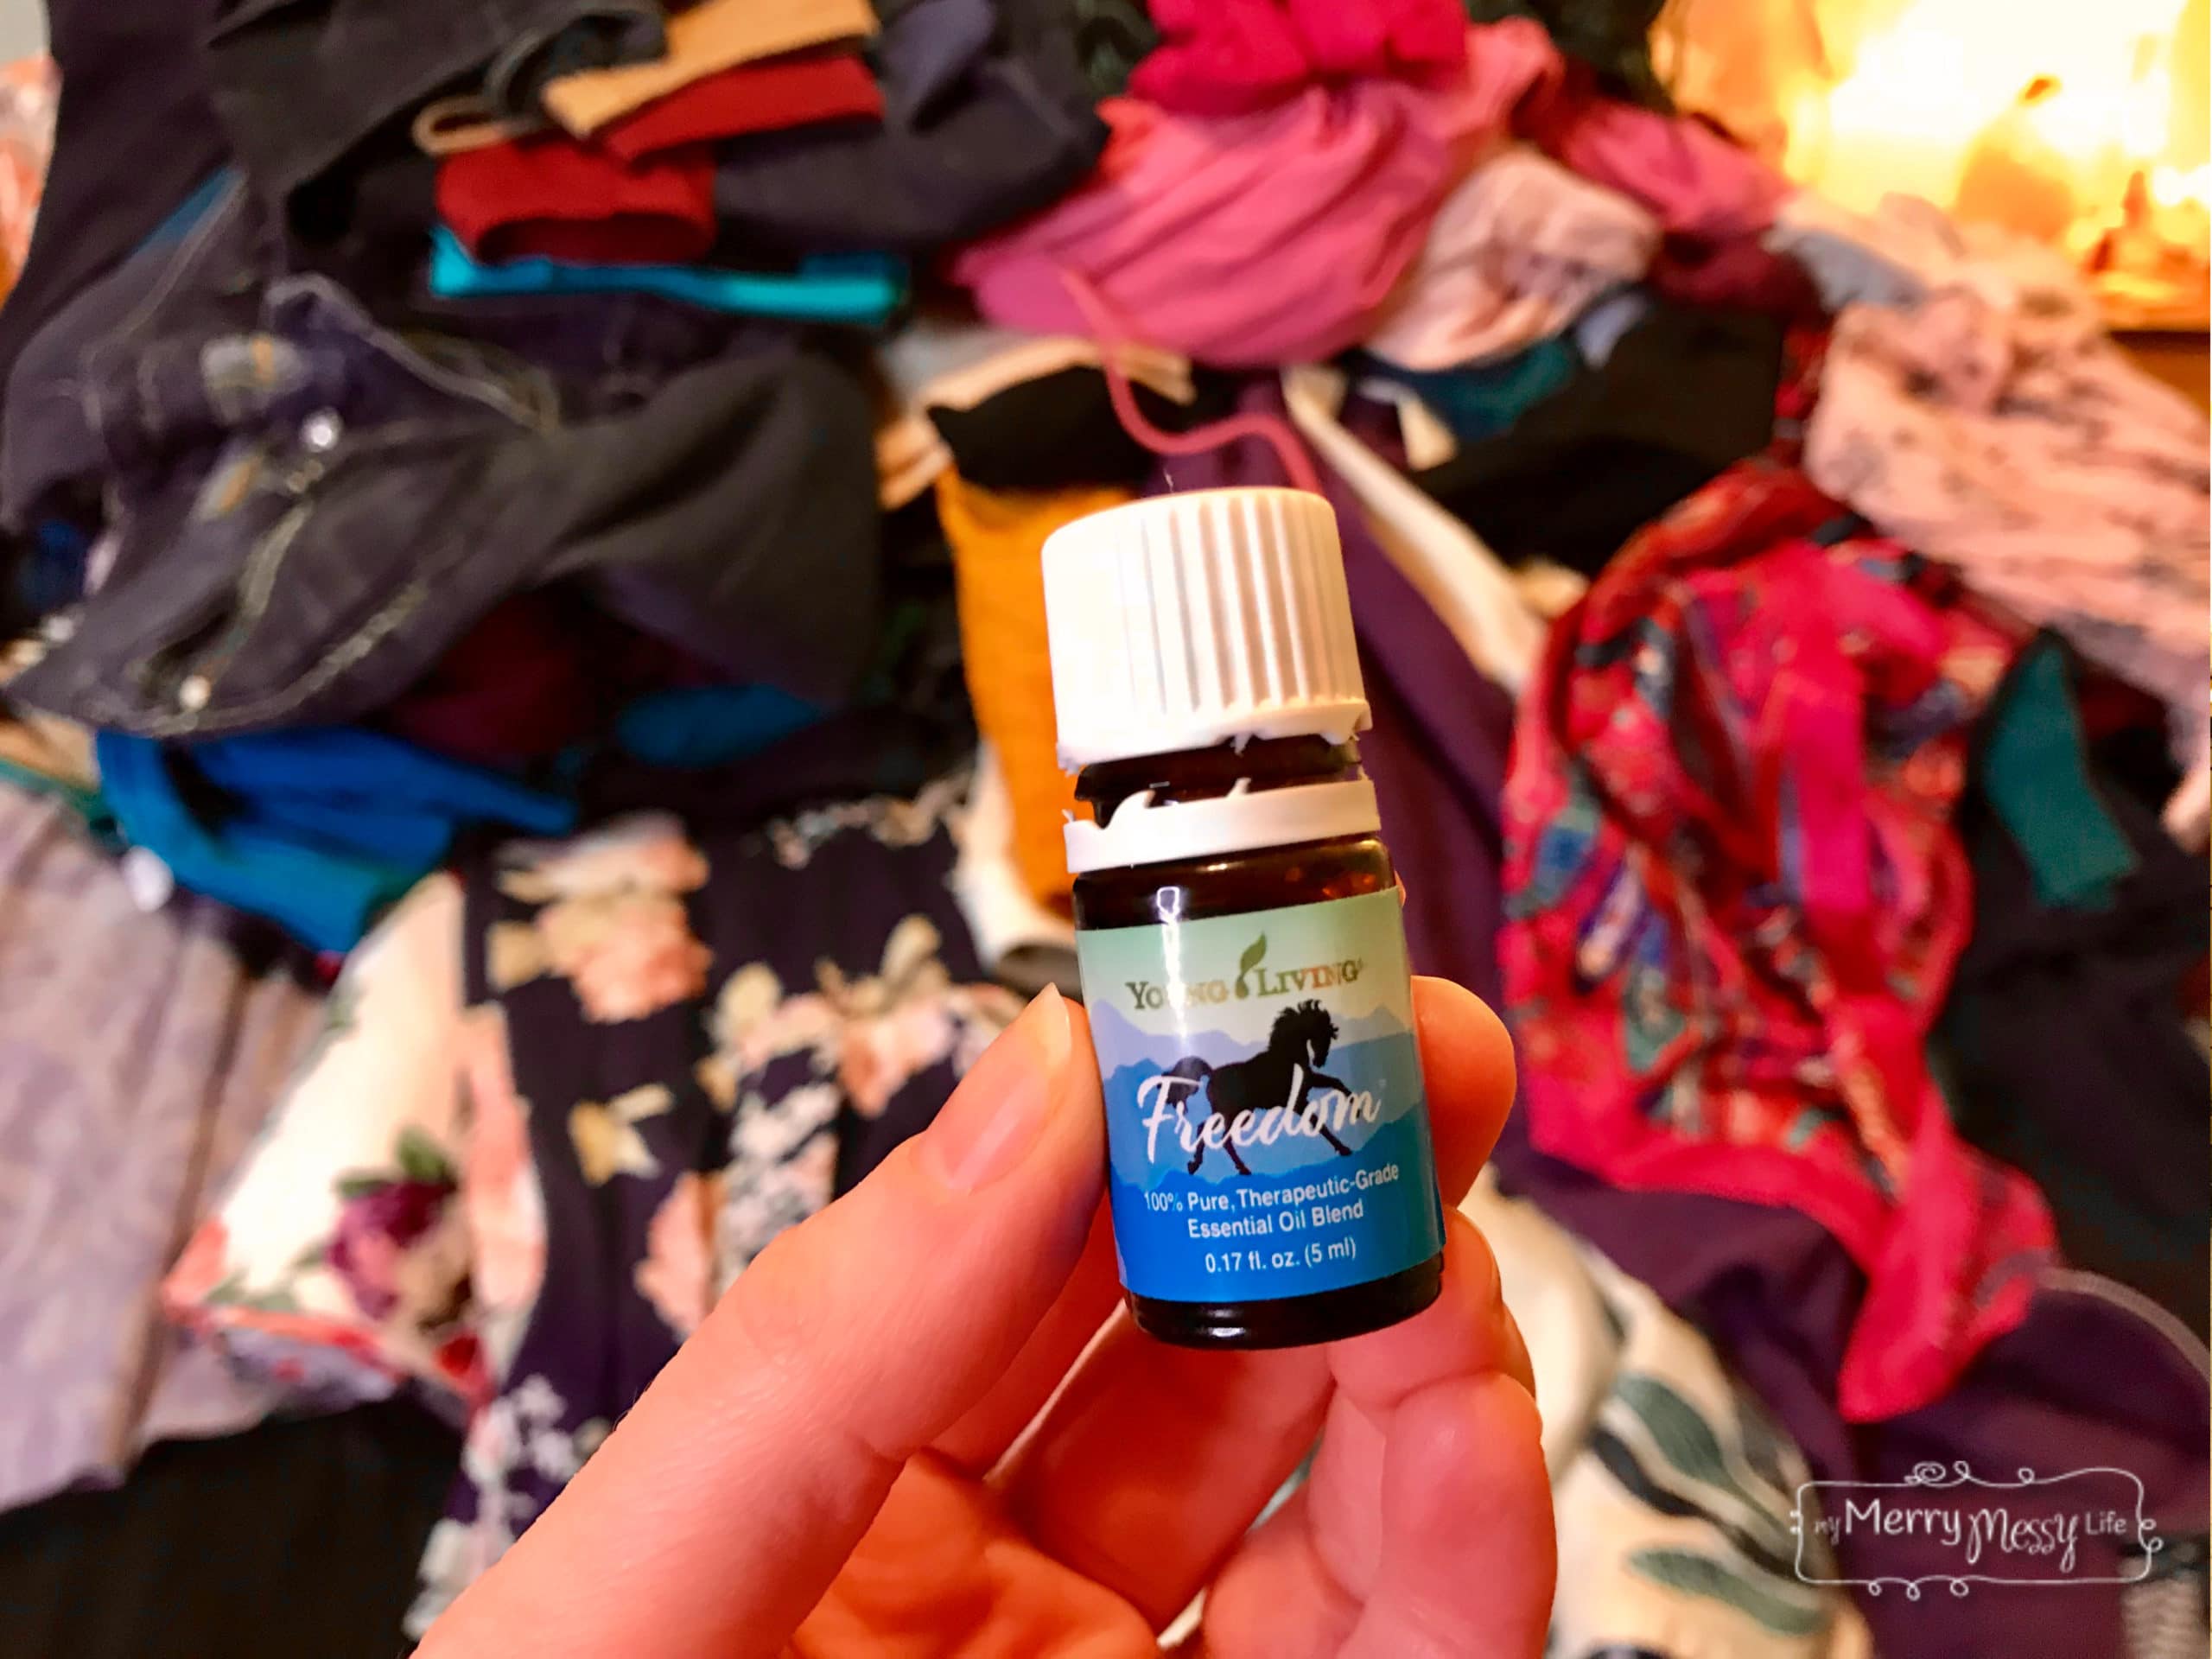 As part of my own Konmari Method, Freedom Essential Oil from Young Living to help me let go of things I no longer need in 